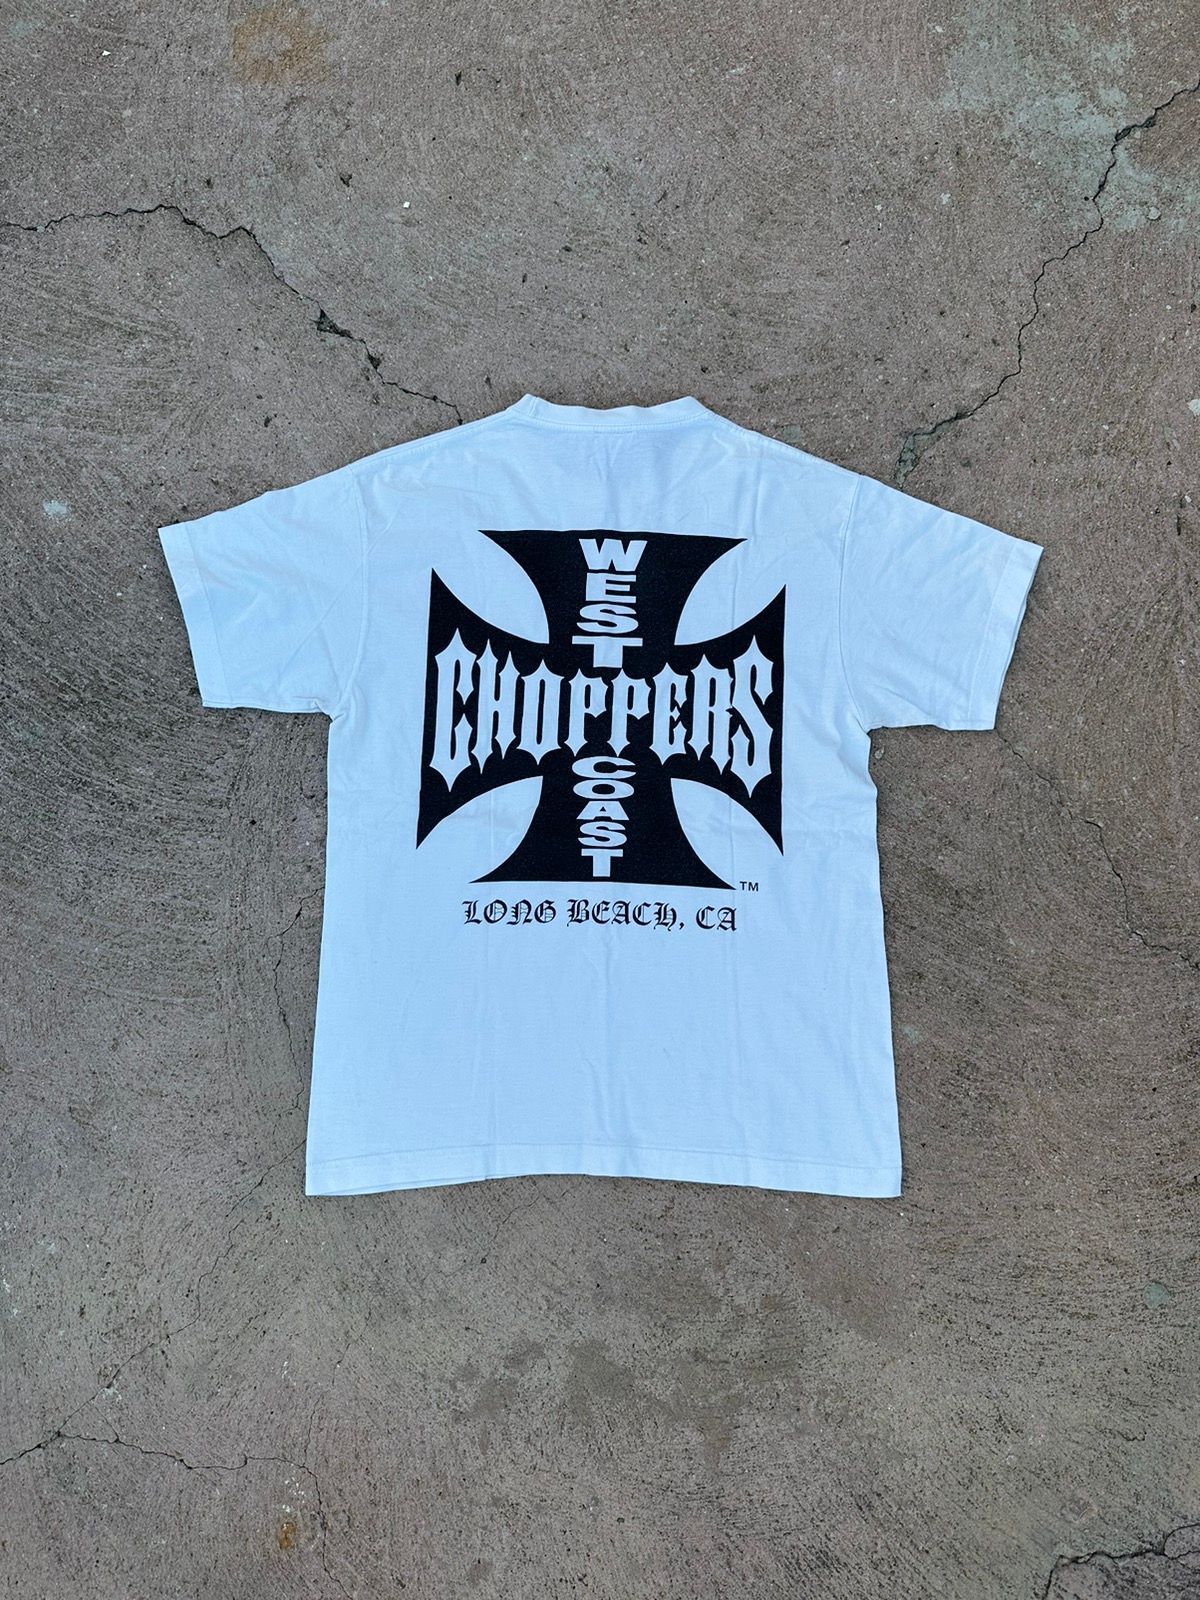 Pre-owned Choppers X Vintage West Coast Choppers Tee T Shirt Vintage White